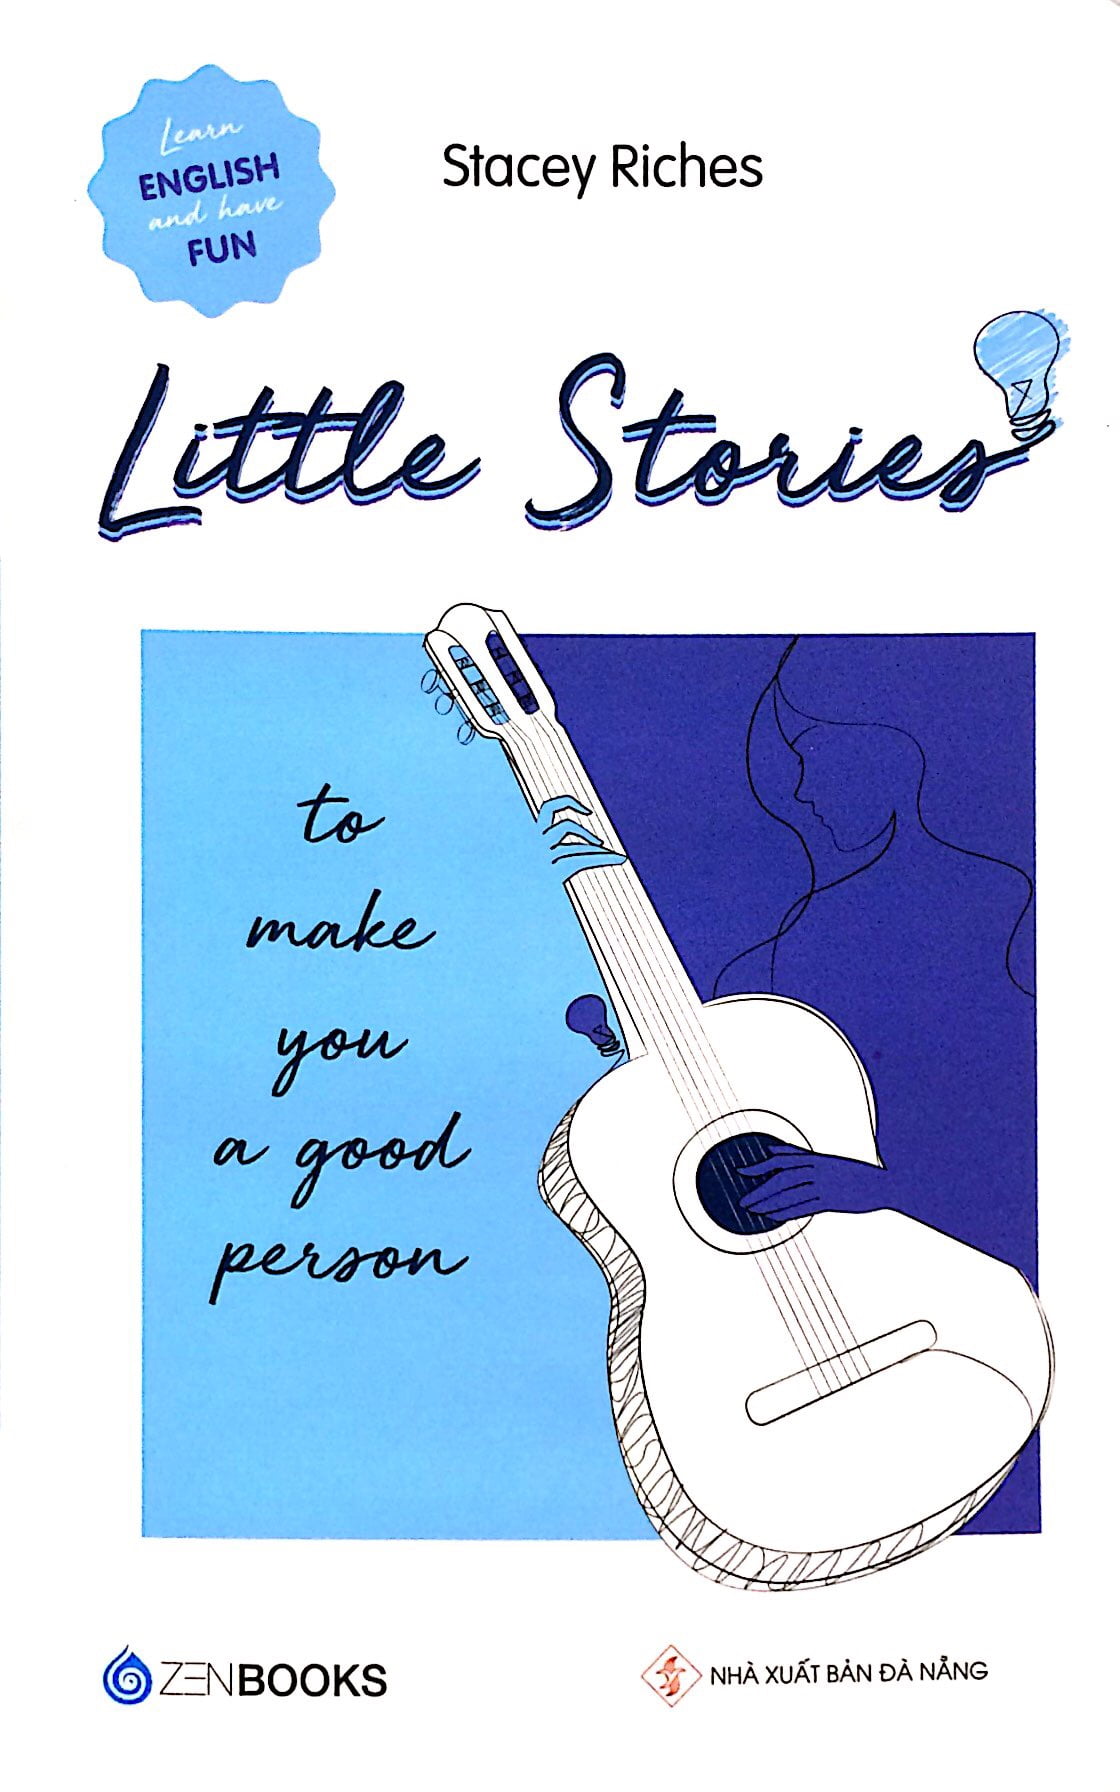 Little Stories - To Make You A Good Person PDF